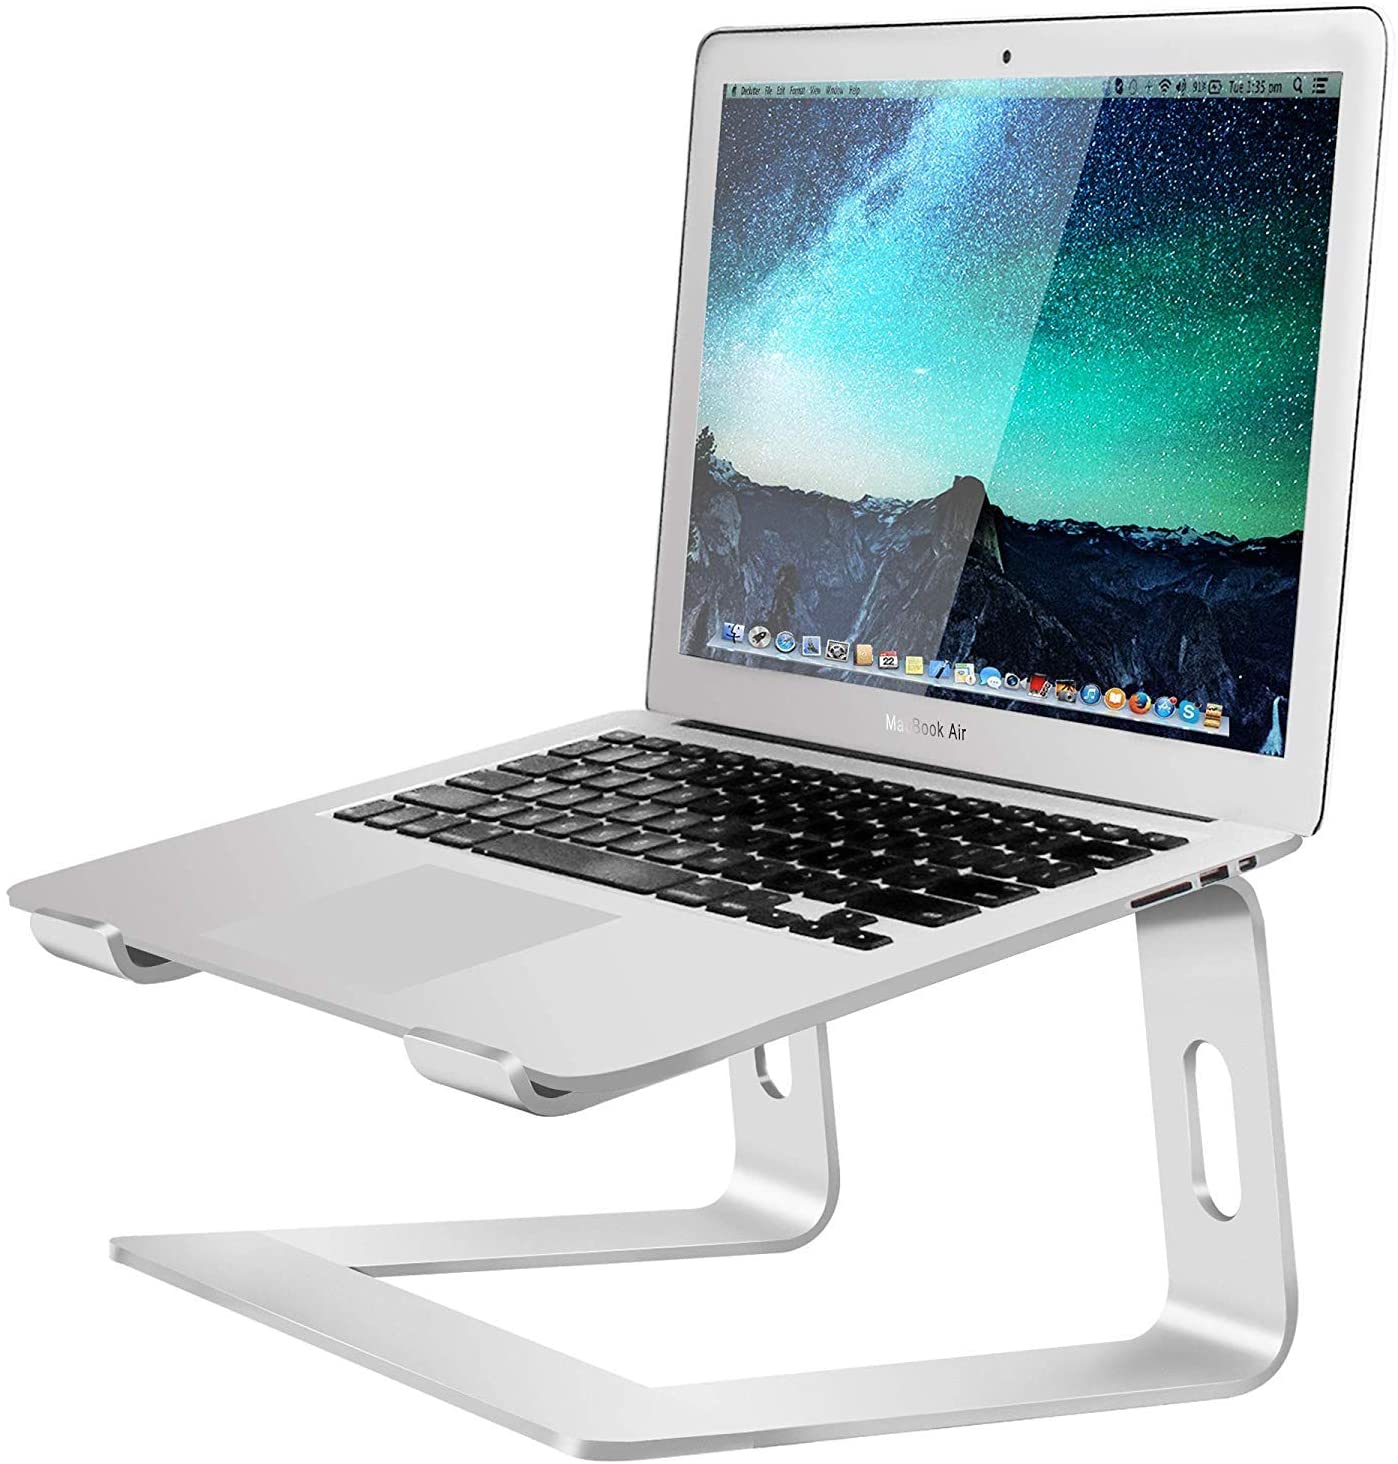 HF-LSH: Aluminum Laptop Stand for Desk Compatible with Mac MacBook Pro Air Apple Notebook, Portable Holder